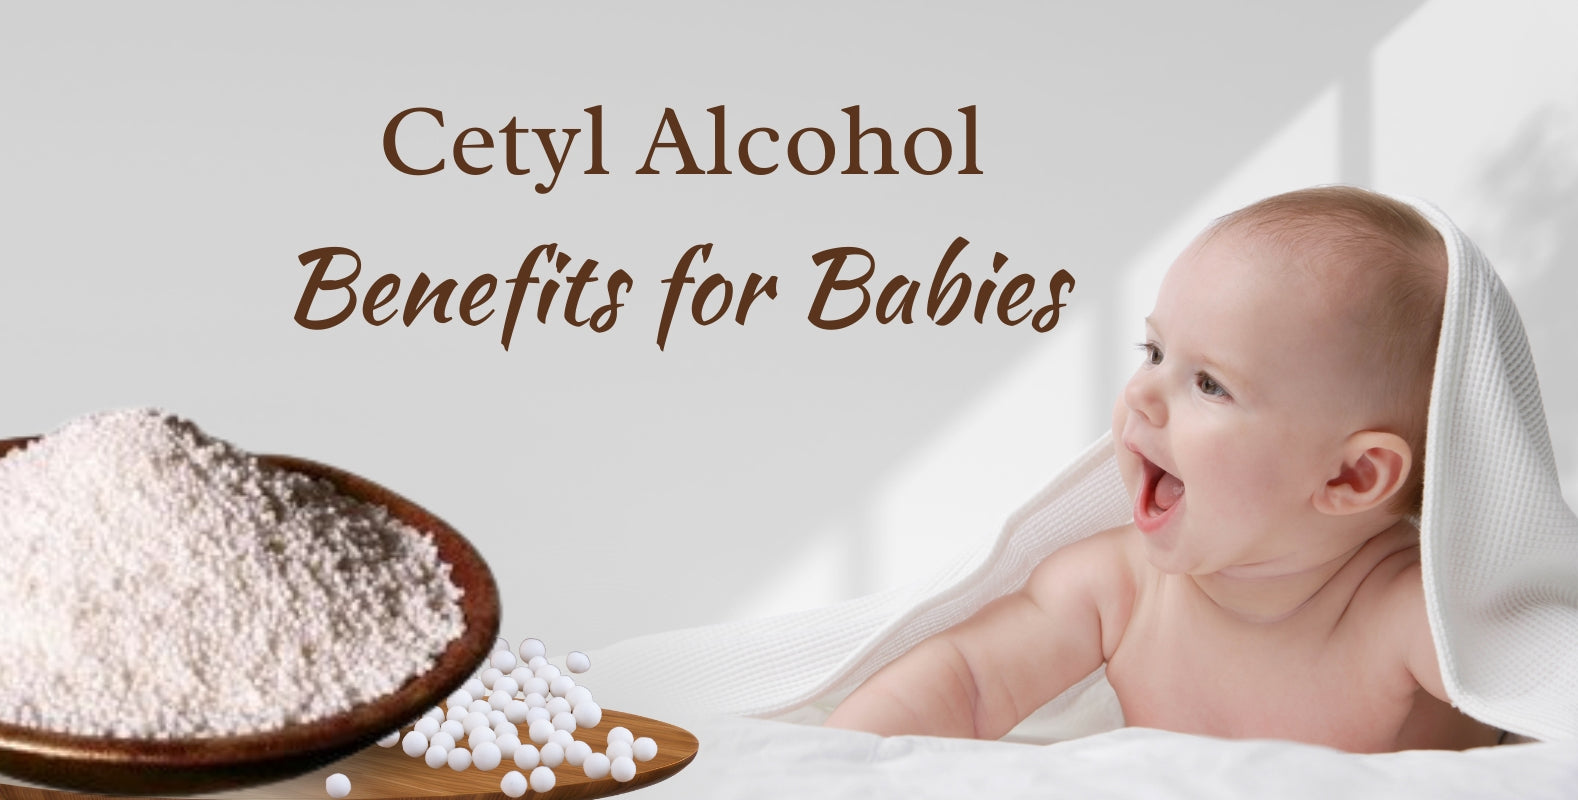 Cetyl Alcohol Benefits For Babies